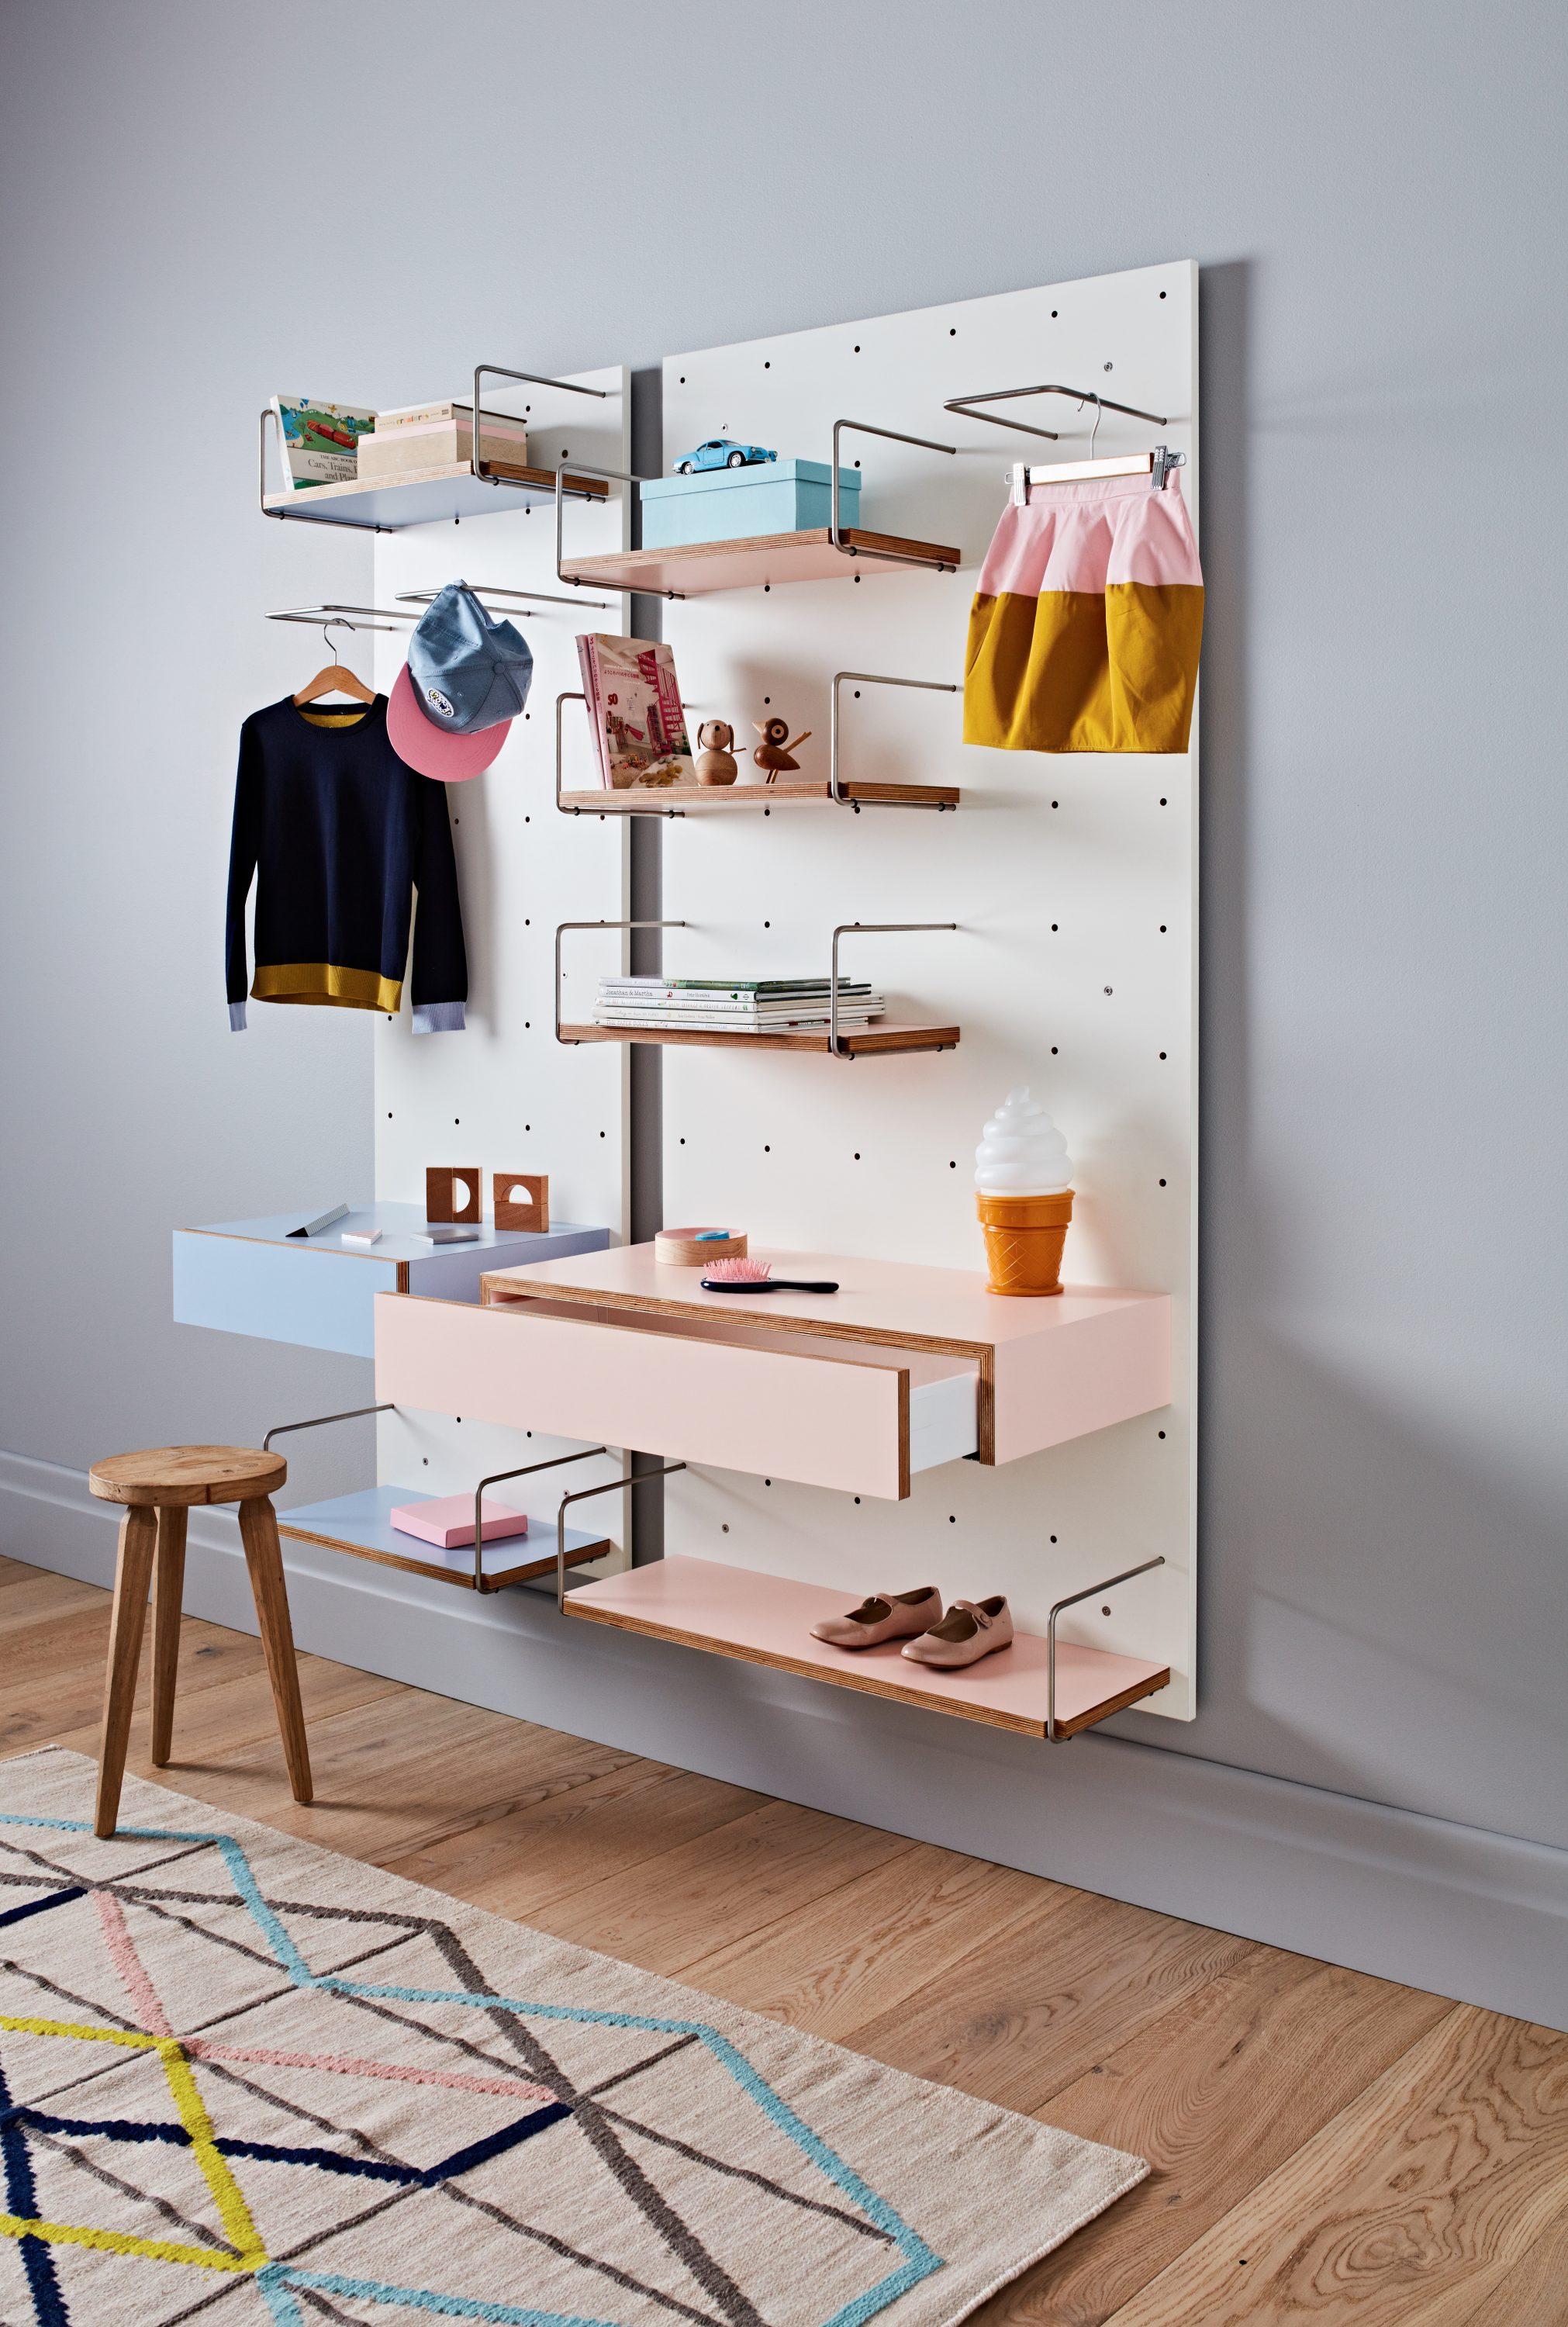 Cantilever Interiors_Wanda Shelving System_Utility_Photography by Mike Baker & Styling by Heather Nette King_14